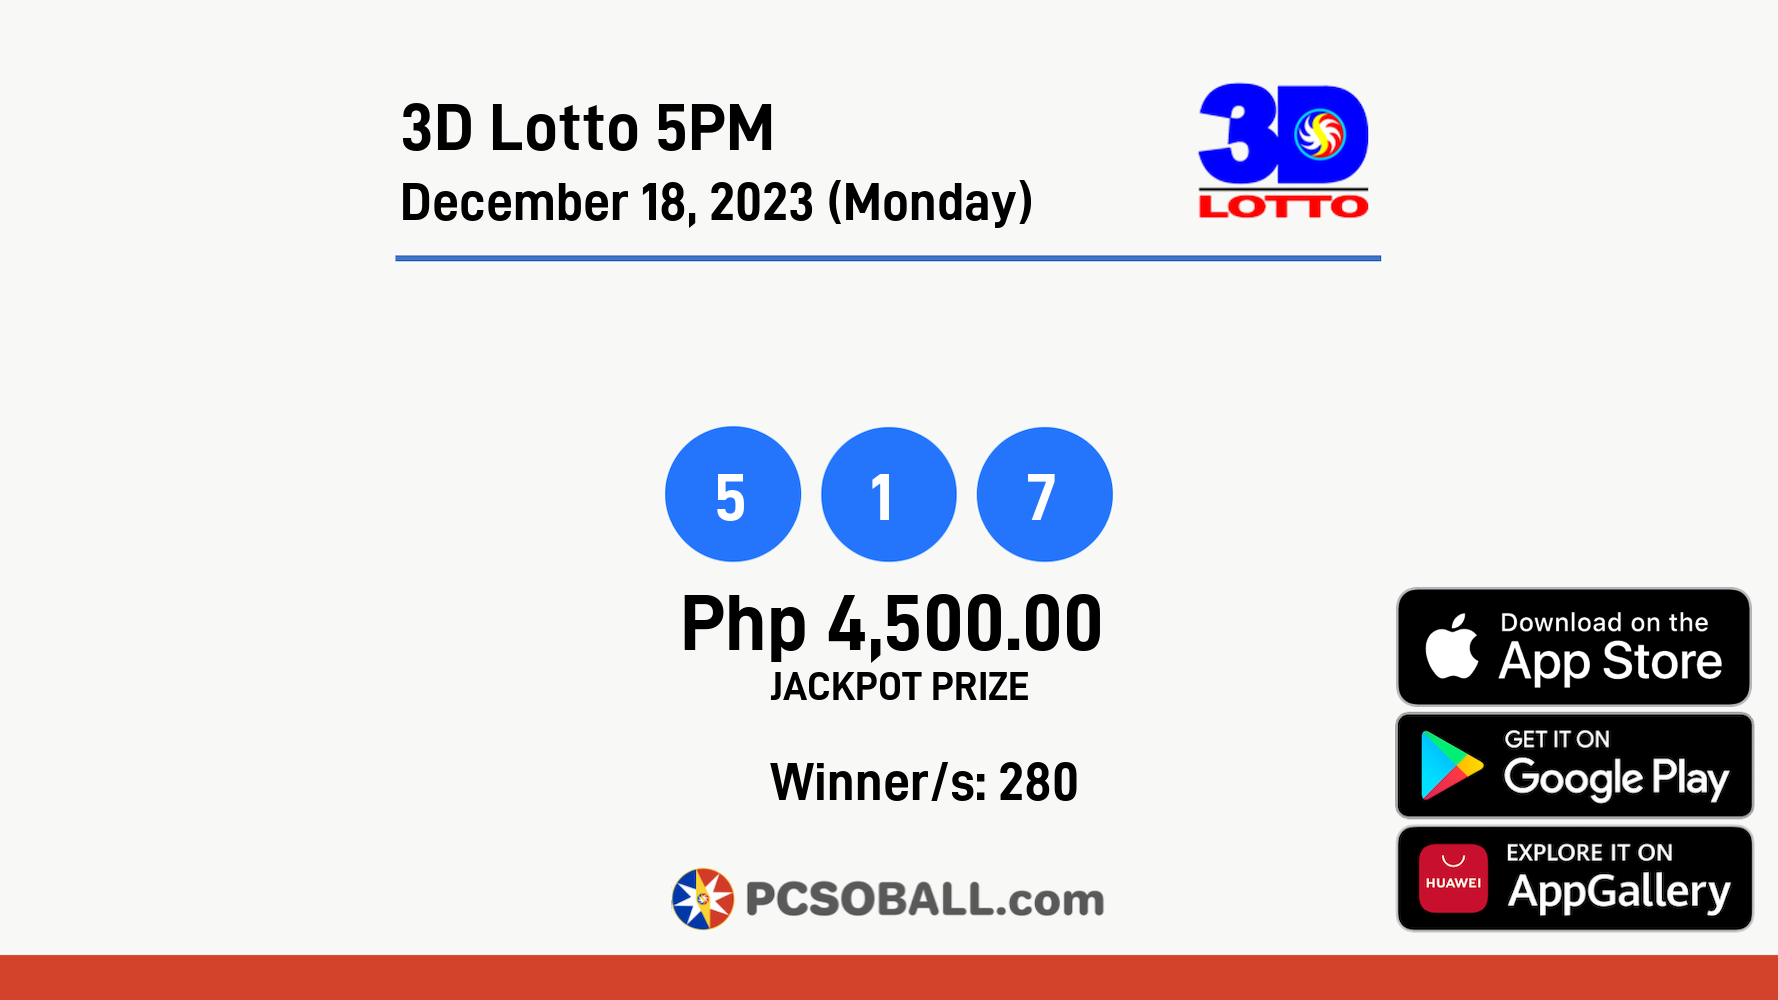 3D Lotto 5PM December 18, 2023 (Monday) Result